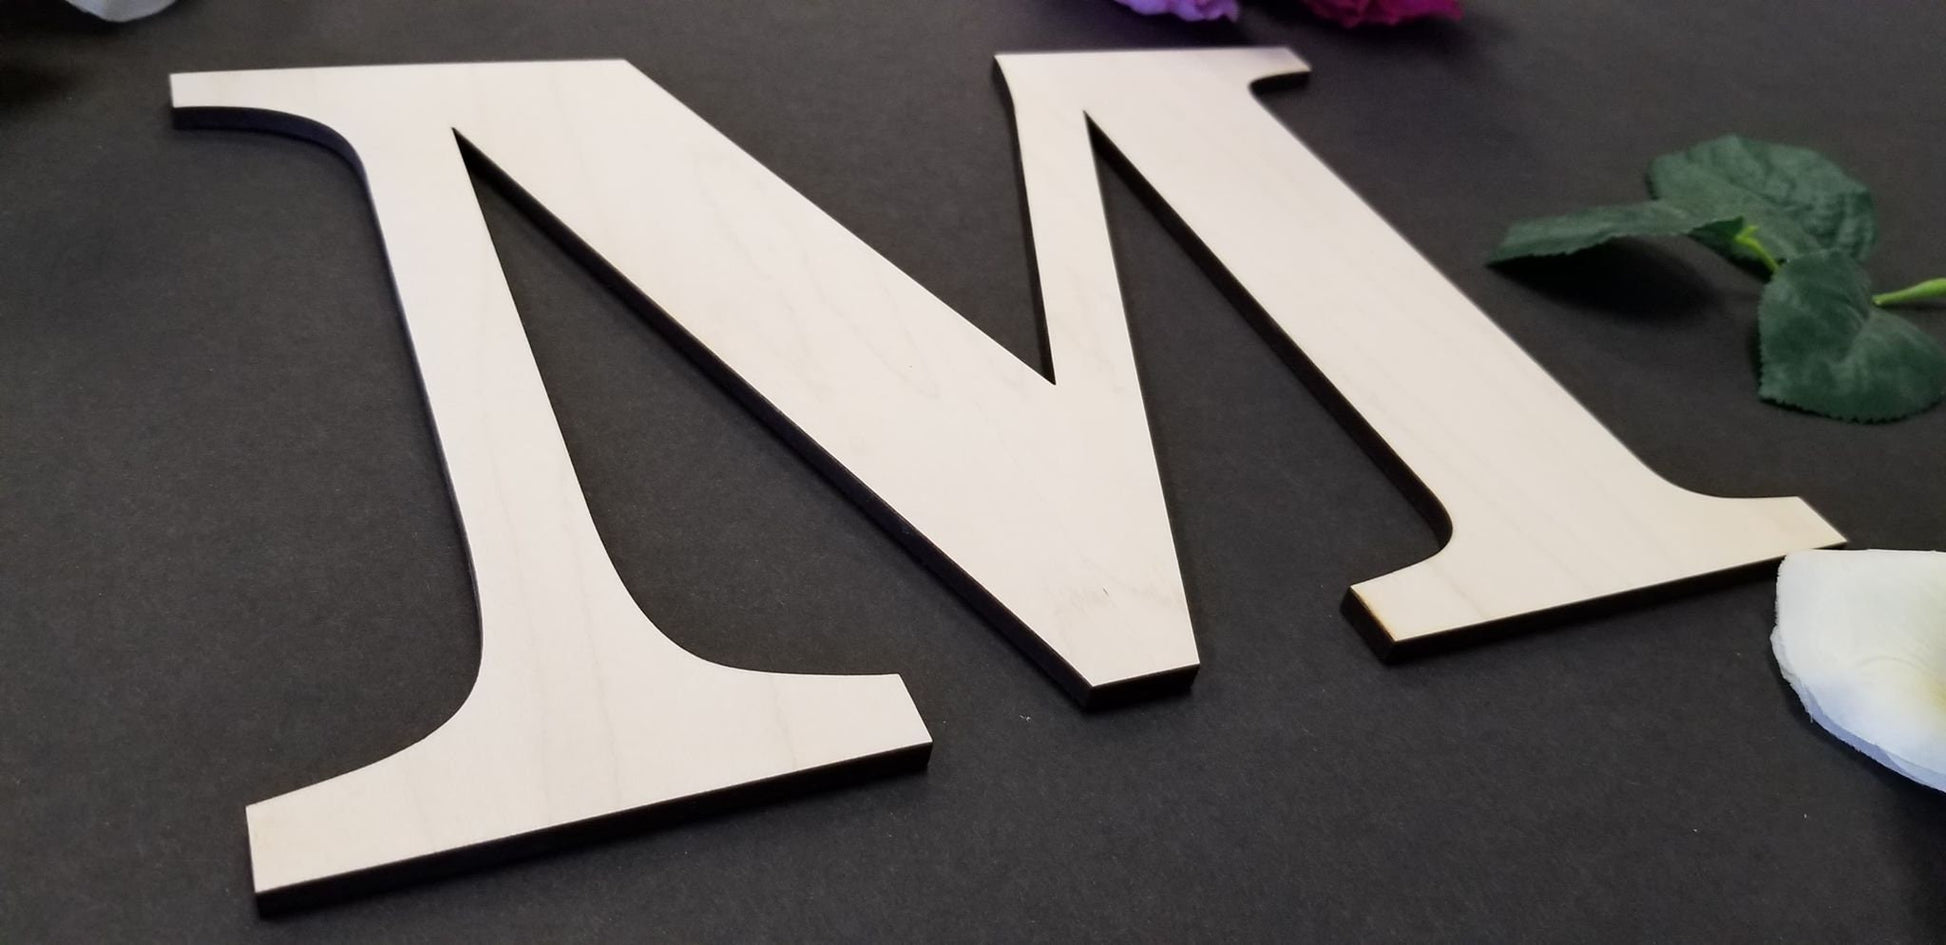 Wooden Letter Block Font, Impact, Unfinished DIY Wall Decor